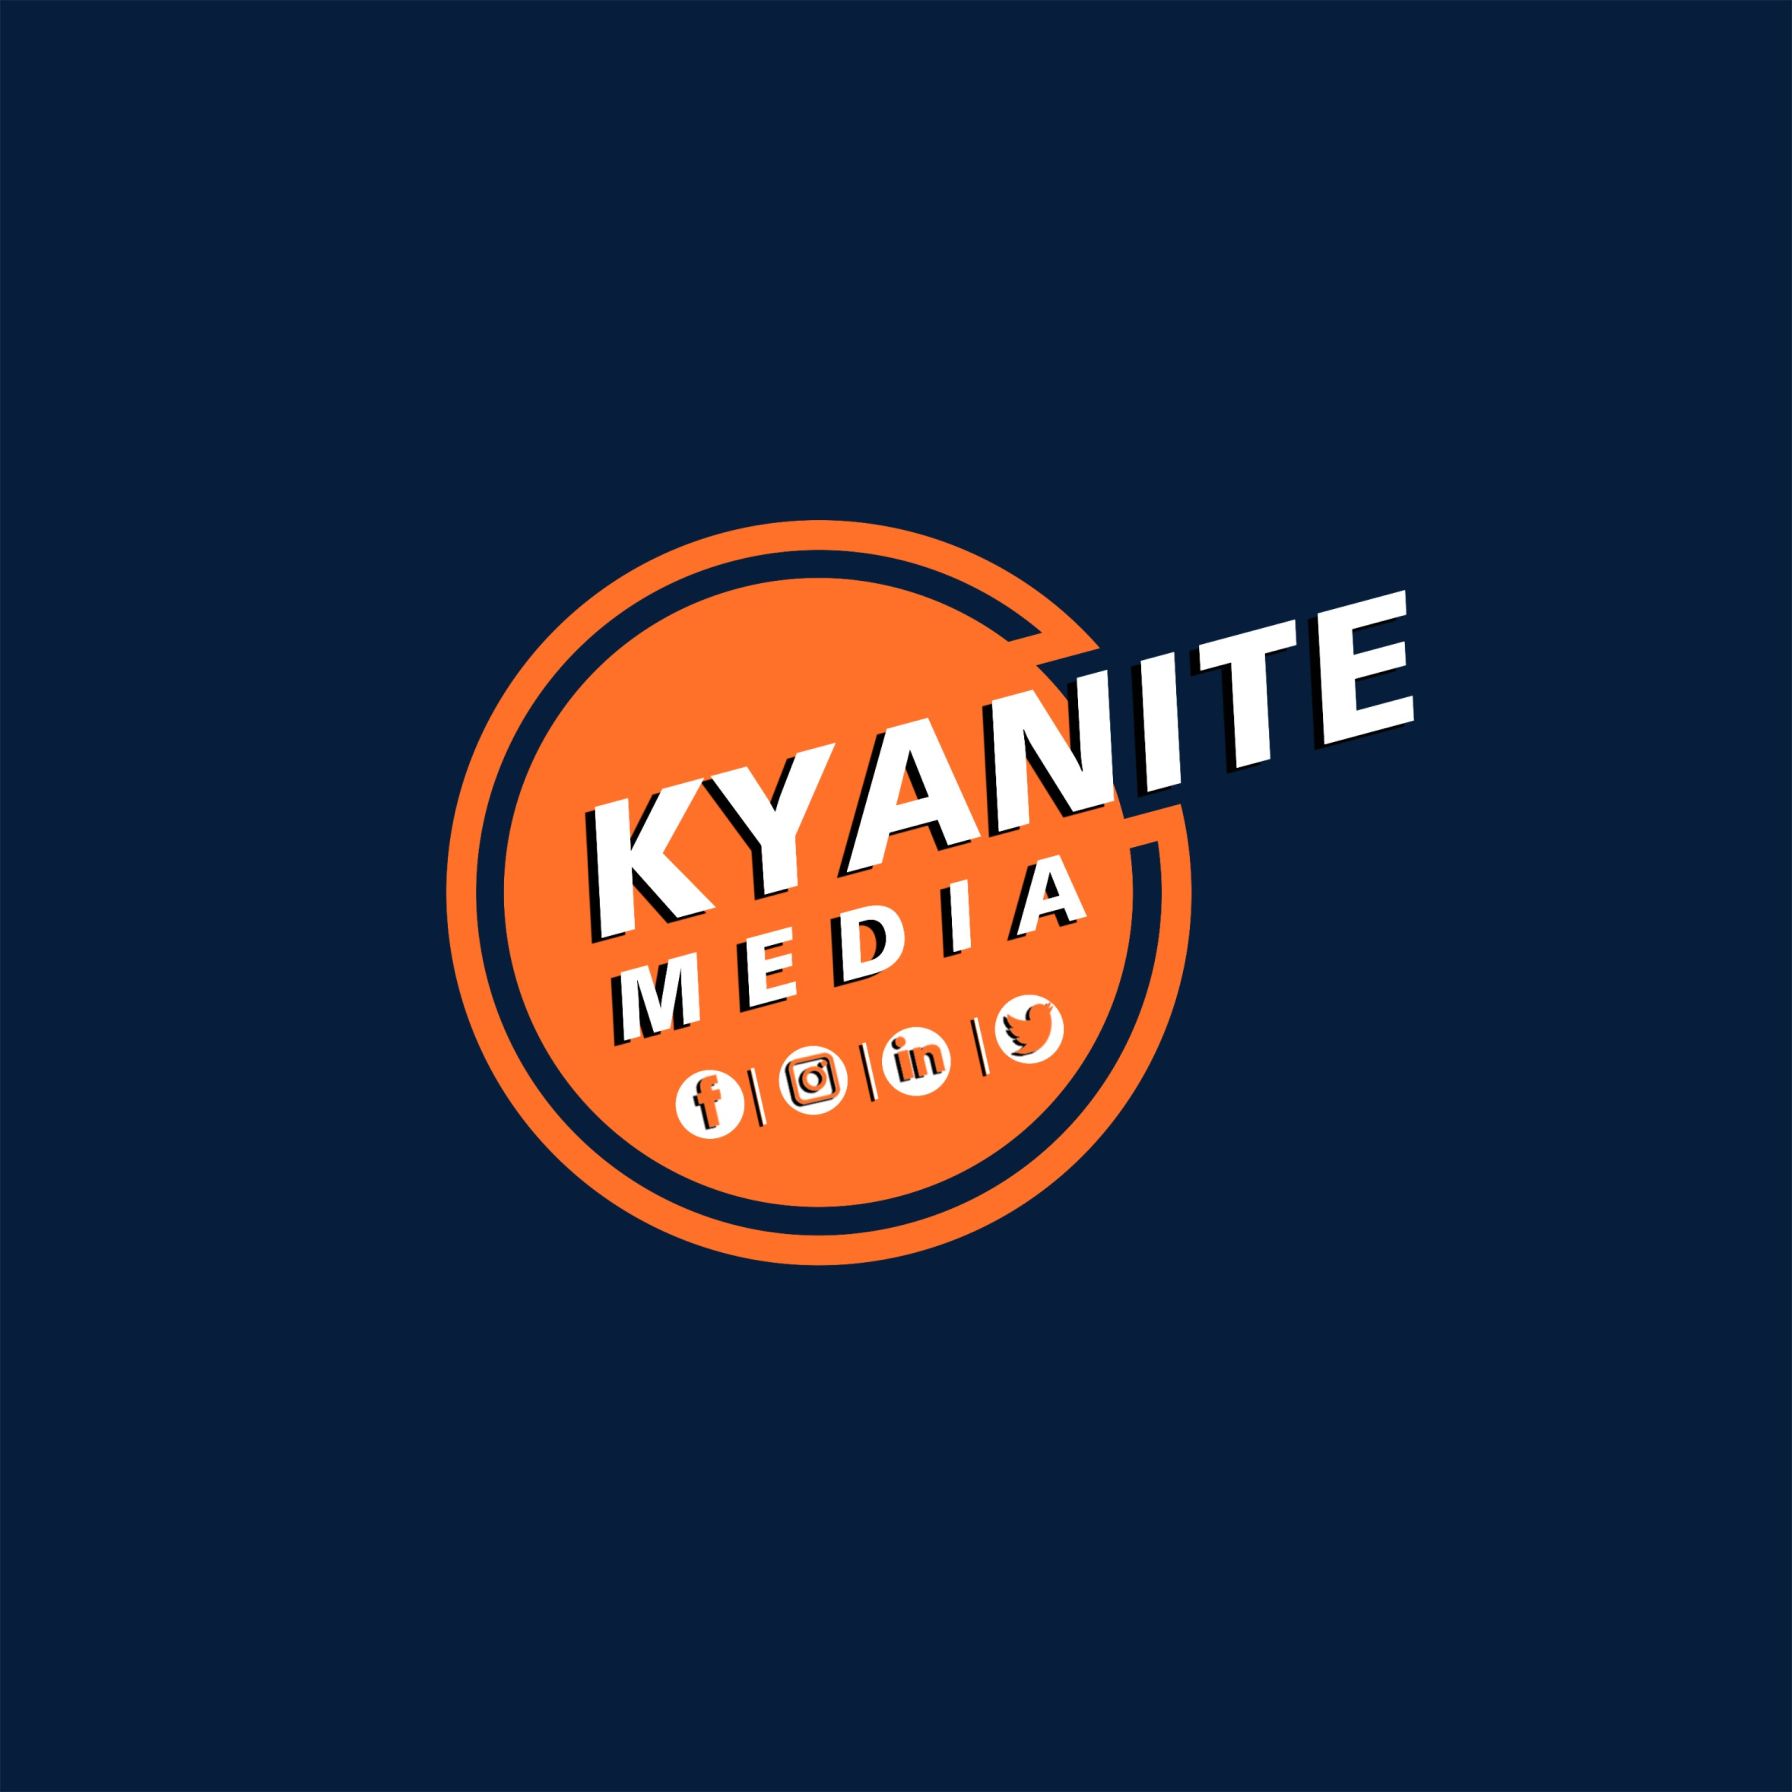 Kyanitemedia|IT Services|Professional Services